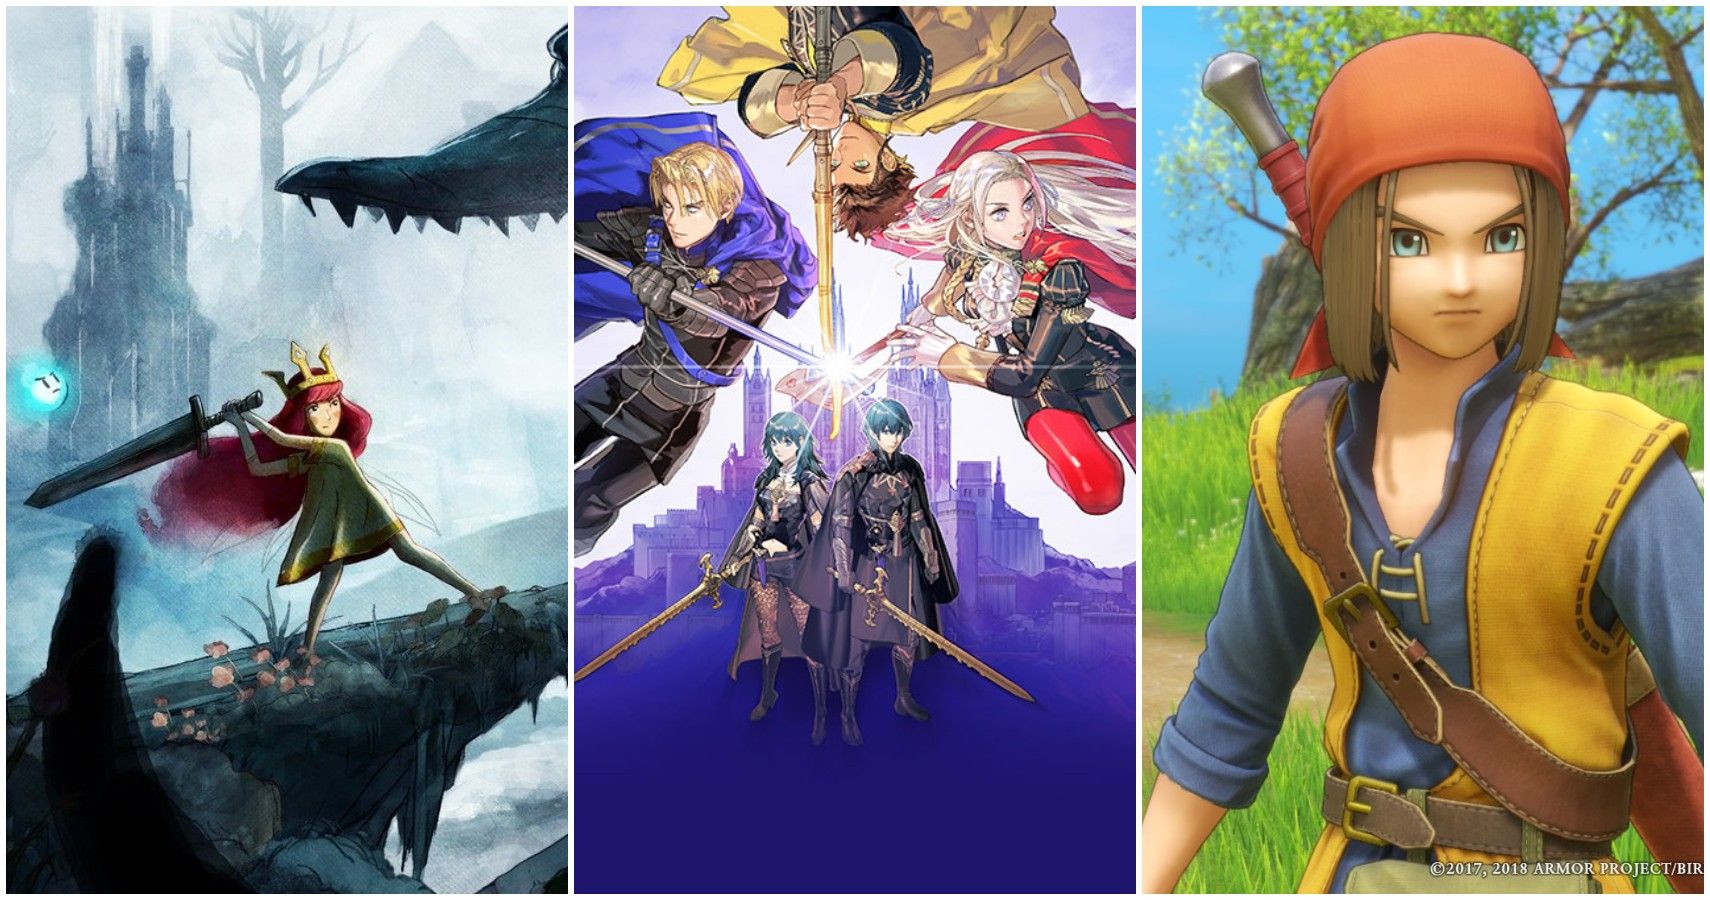 The 10 Best JRPG Developers According To Metacritic, Ranked